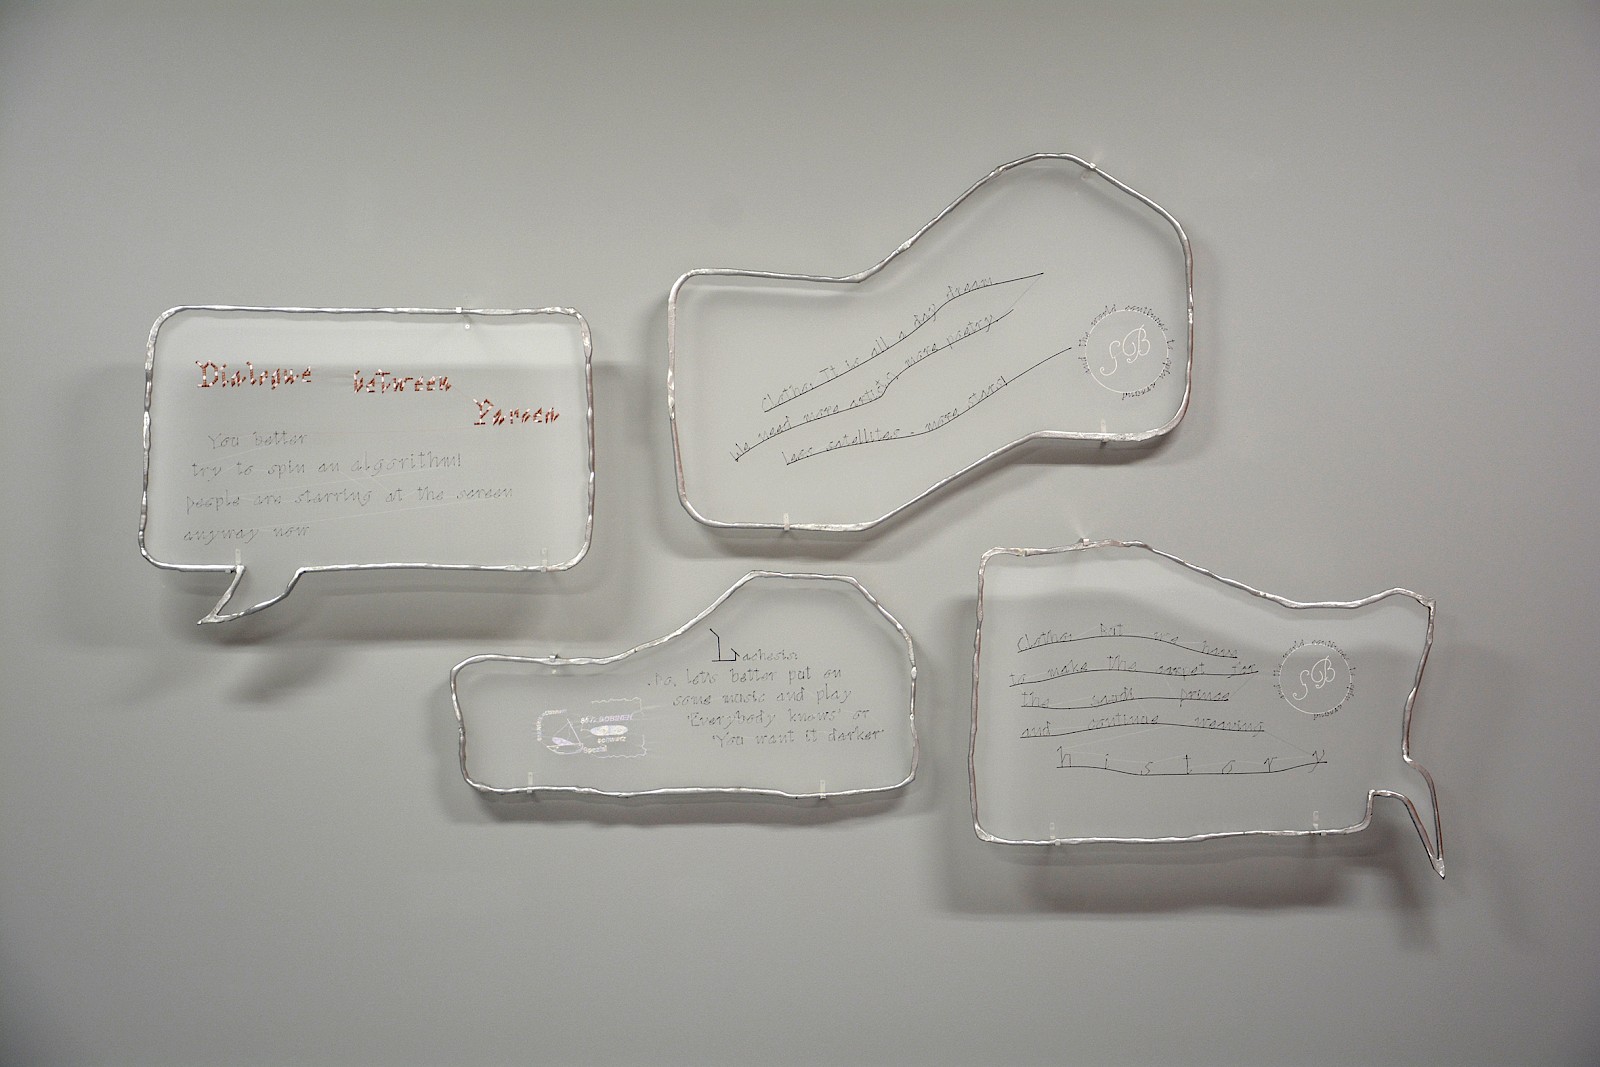 Image - Speechbubbles: Alumnium frames with embroidered text